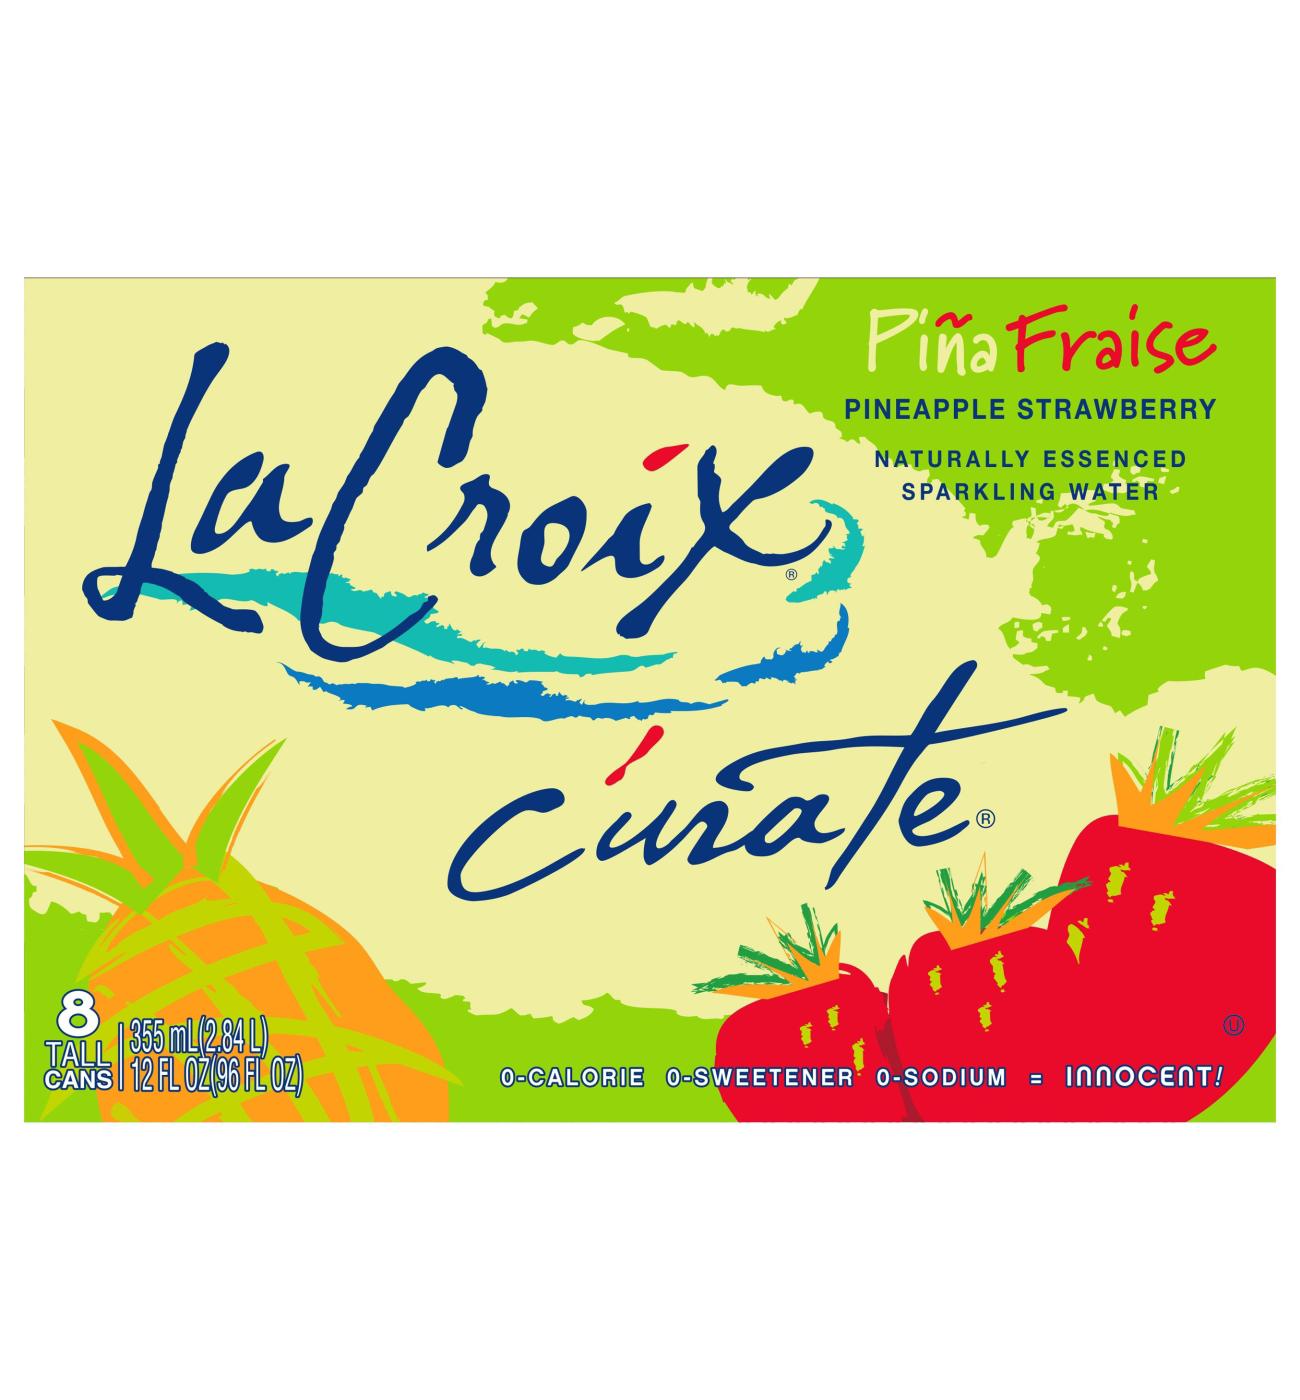 LaCroix Curate Pina Fraise Sparkling Water 12 oz Cans; image 2 of 2